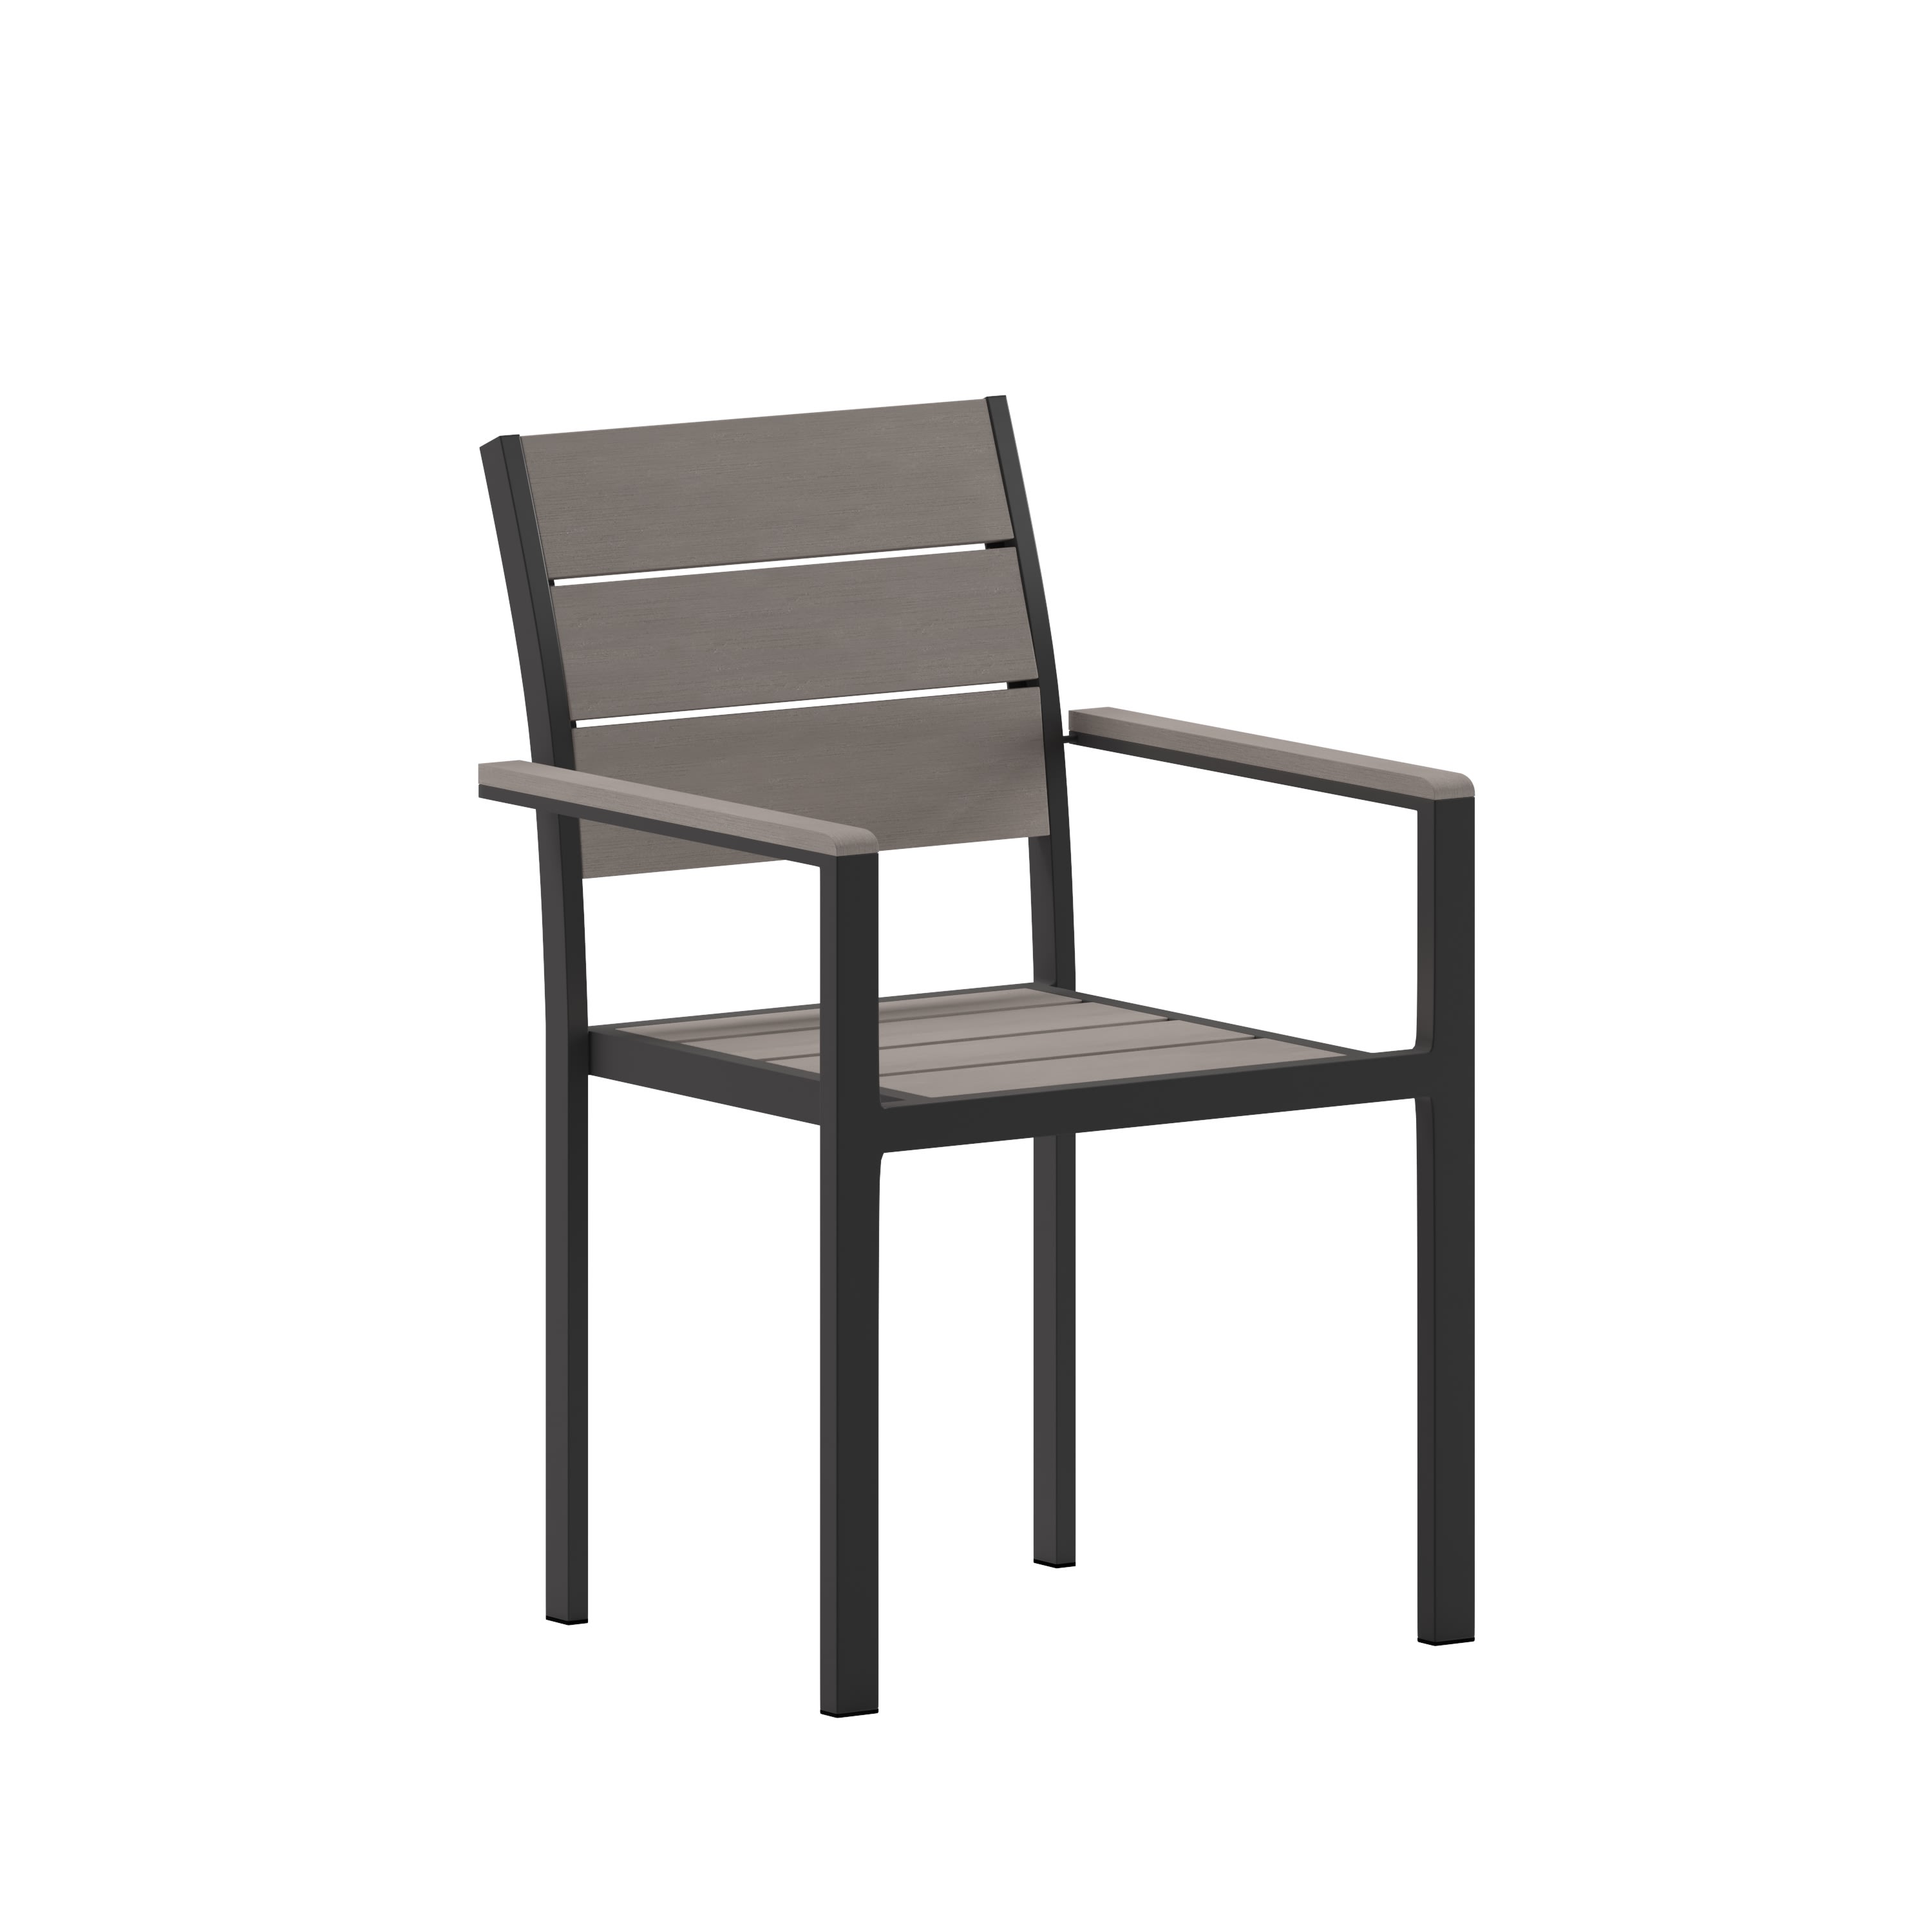 Patio Chair with Arms 4 – Stack Less Chairs SB-CA108-WA